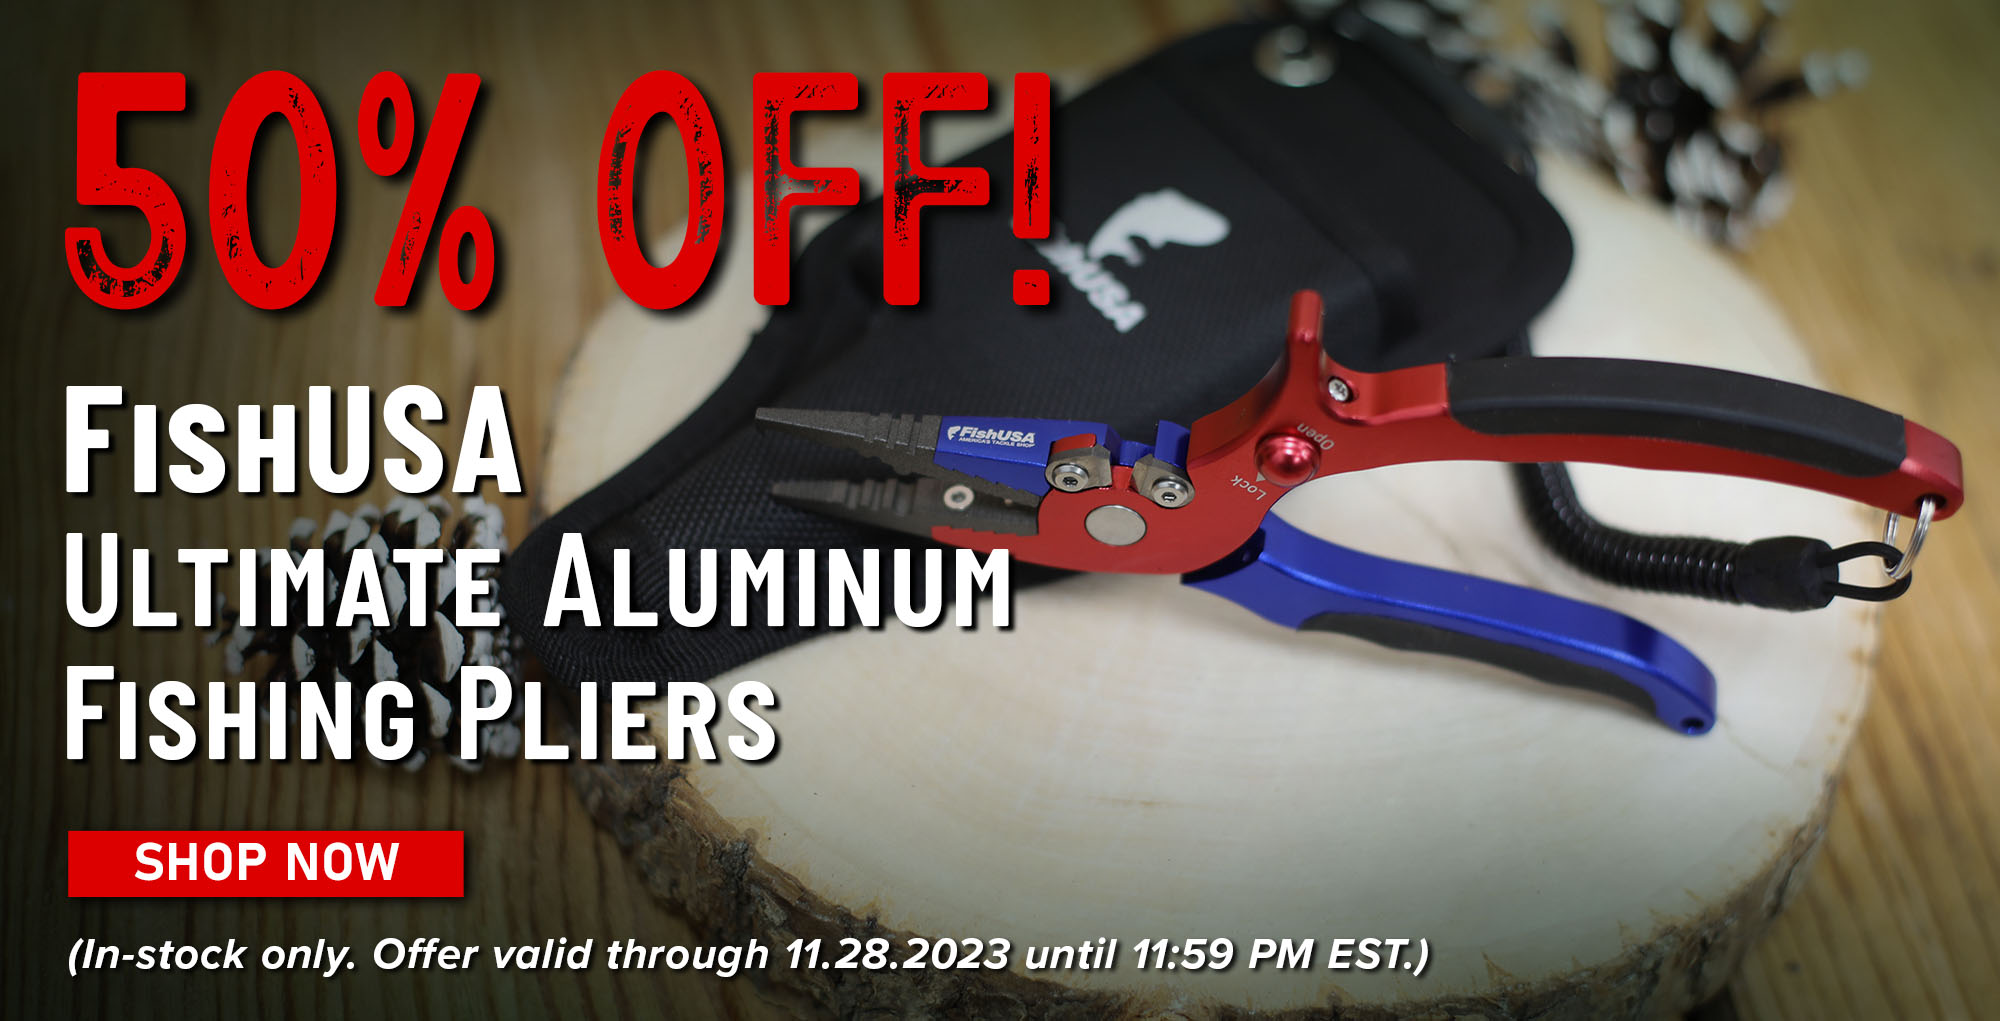 50% Off! FishUSA Ultimate Aluminum Fishing Pliers Shop Now (In-stock only. Offer valid through 11.28.2023 until 11:59 PM EST.)